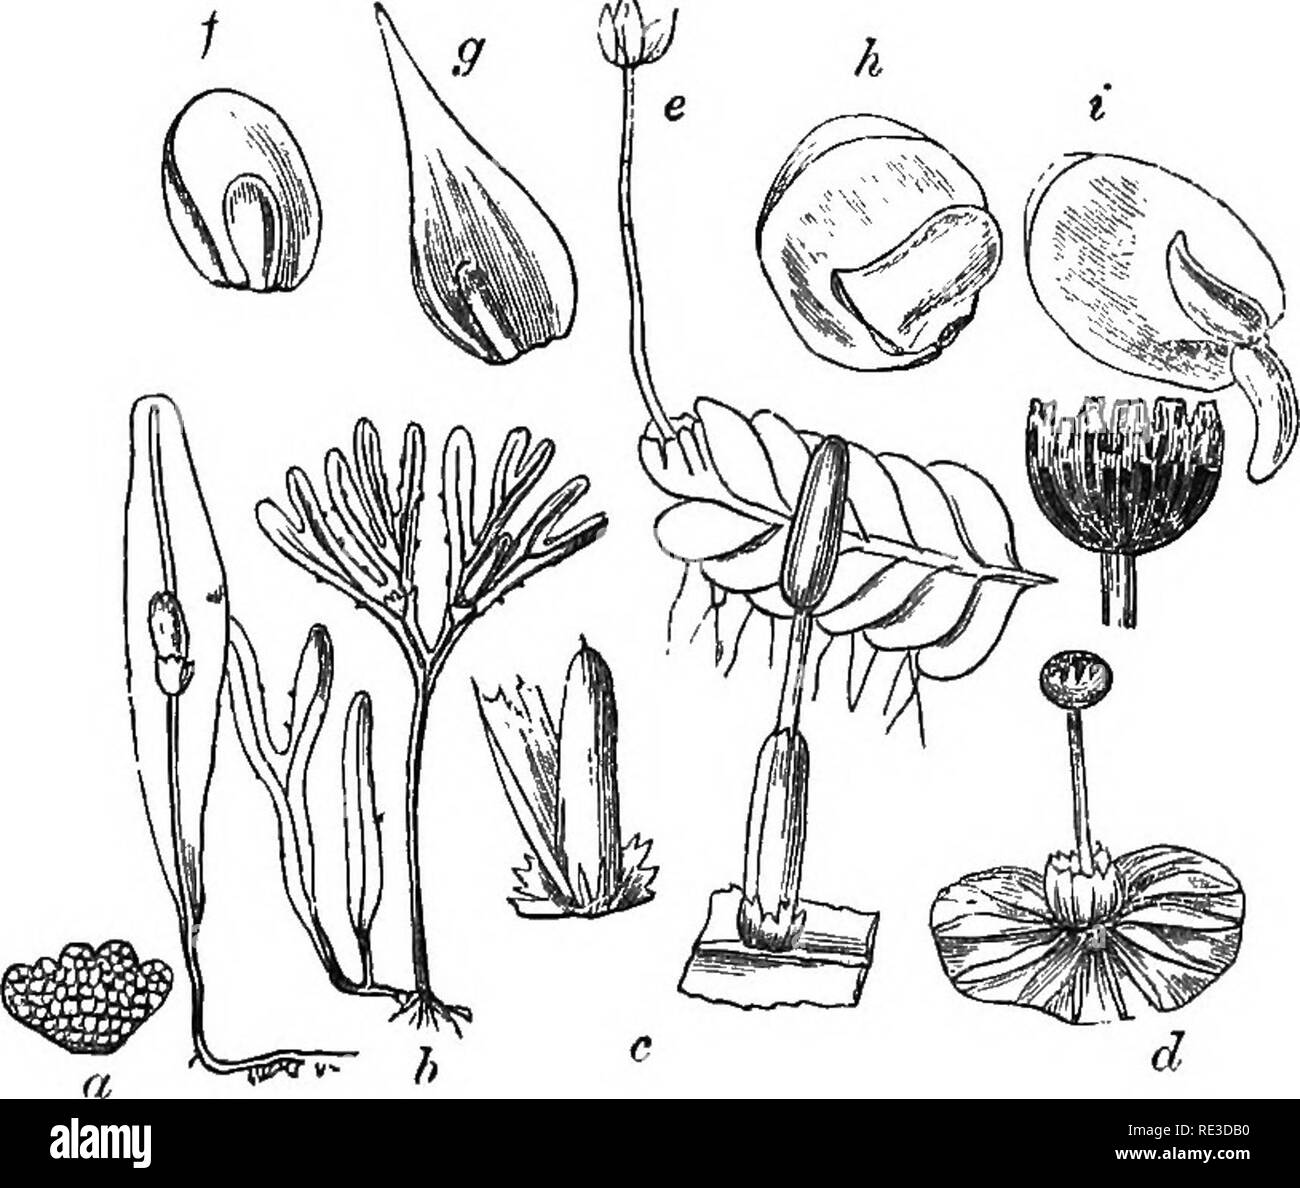 . Introduction to cryptogamic botany. Cryptogams. INTKOBUCTION TO CEYPTOGAMIC BOTANY. 451 Nilghemes and the Straits of Magellan. Of the other species some are tropical, while others, as M. eriocaula (Fig. 4), belong to the more equable temperate regions. This is re- ferred by Mitten, together with, M. prehenailis and Aneura multijida, to Sarcomitrium. The tribe would, perhaps, be better united with Haplolamece.. Pig. 95. a. Symphyogyna subsimplex, nat. size, with scale-shaped involucre slightly magnified. b. Symphyogyna hymenop'hyUa, nat. size. Both from the Hookei'ian Herbarium. c. Blyttia Ly Stock Photo